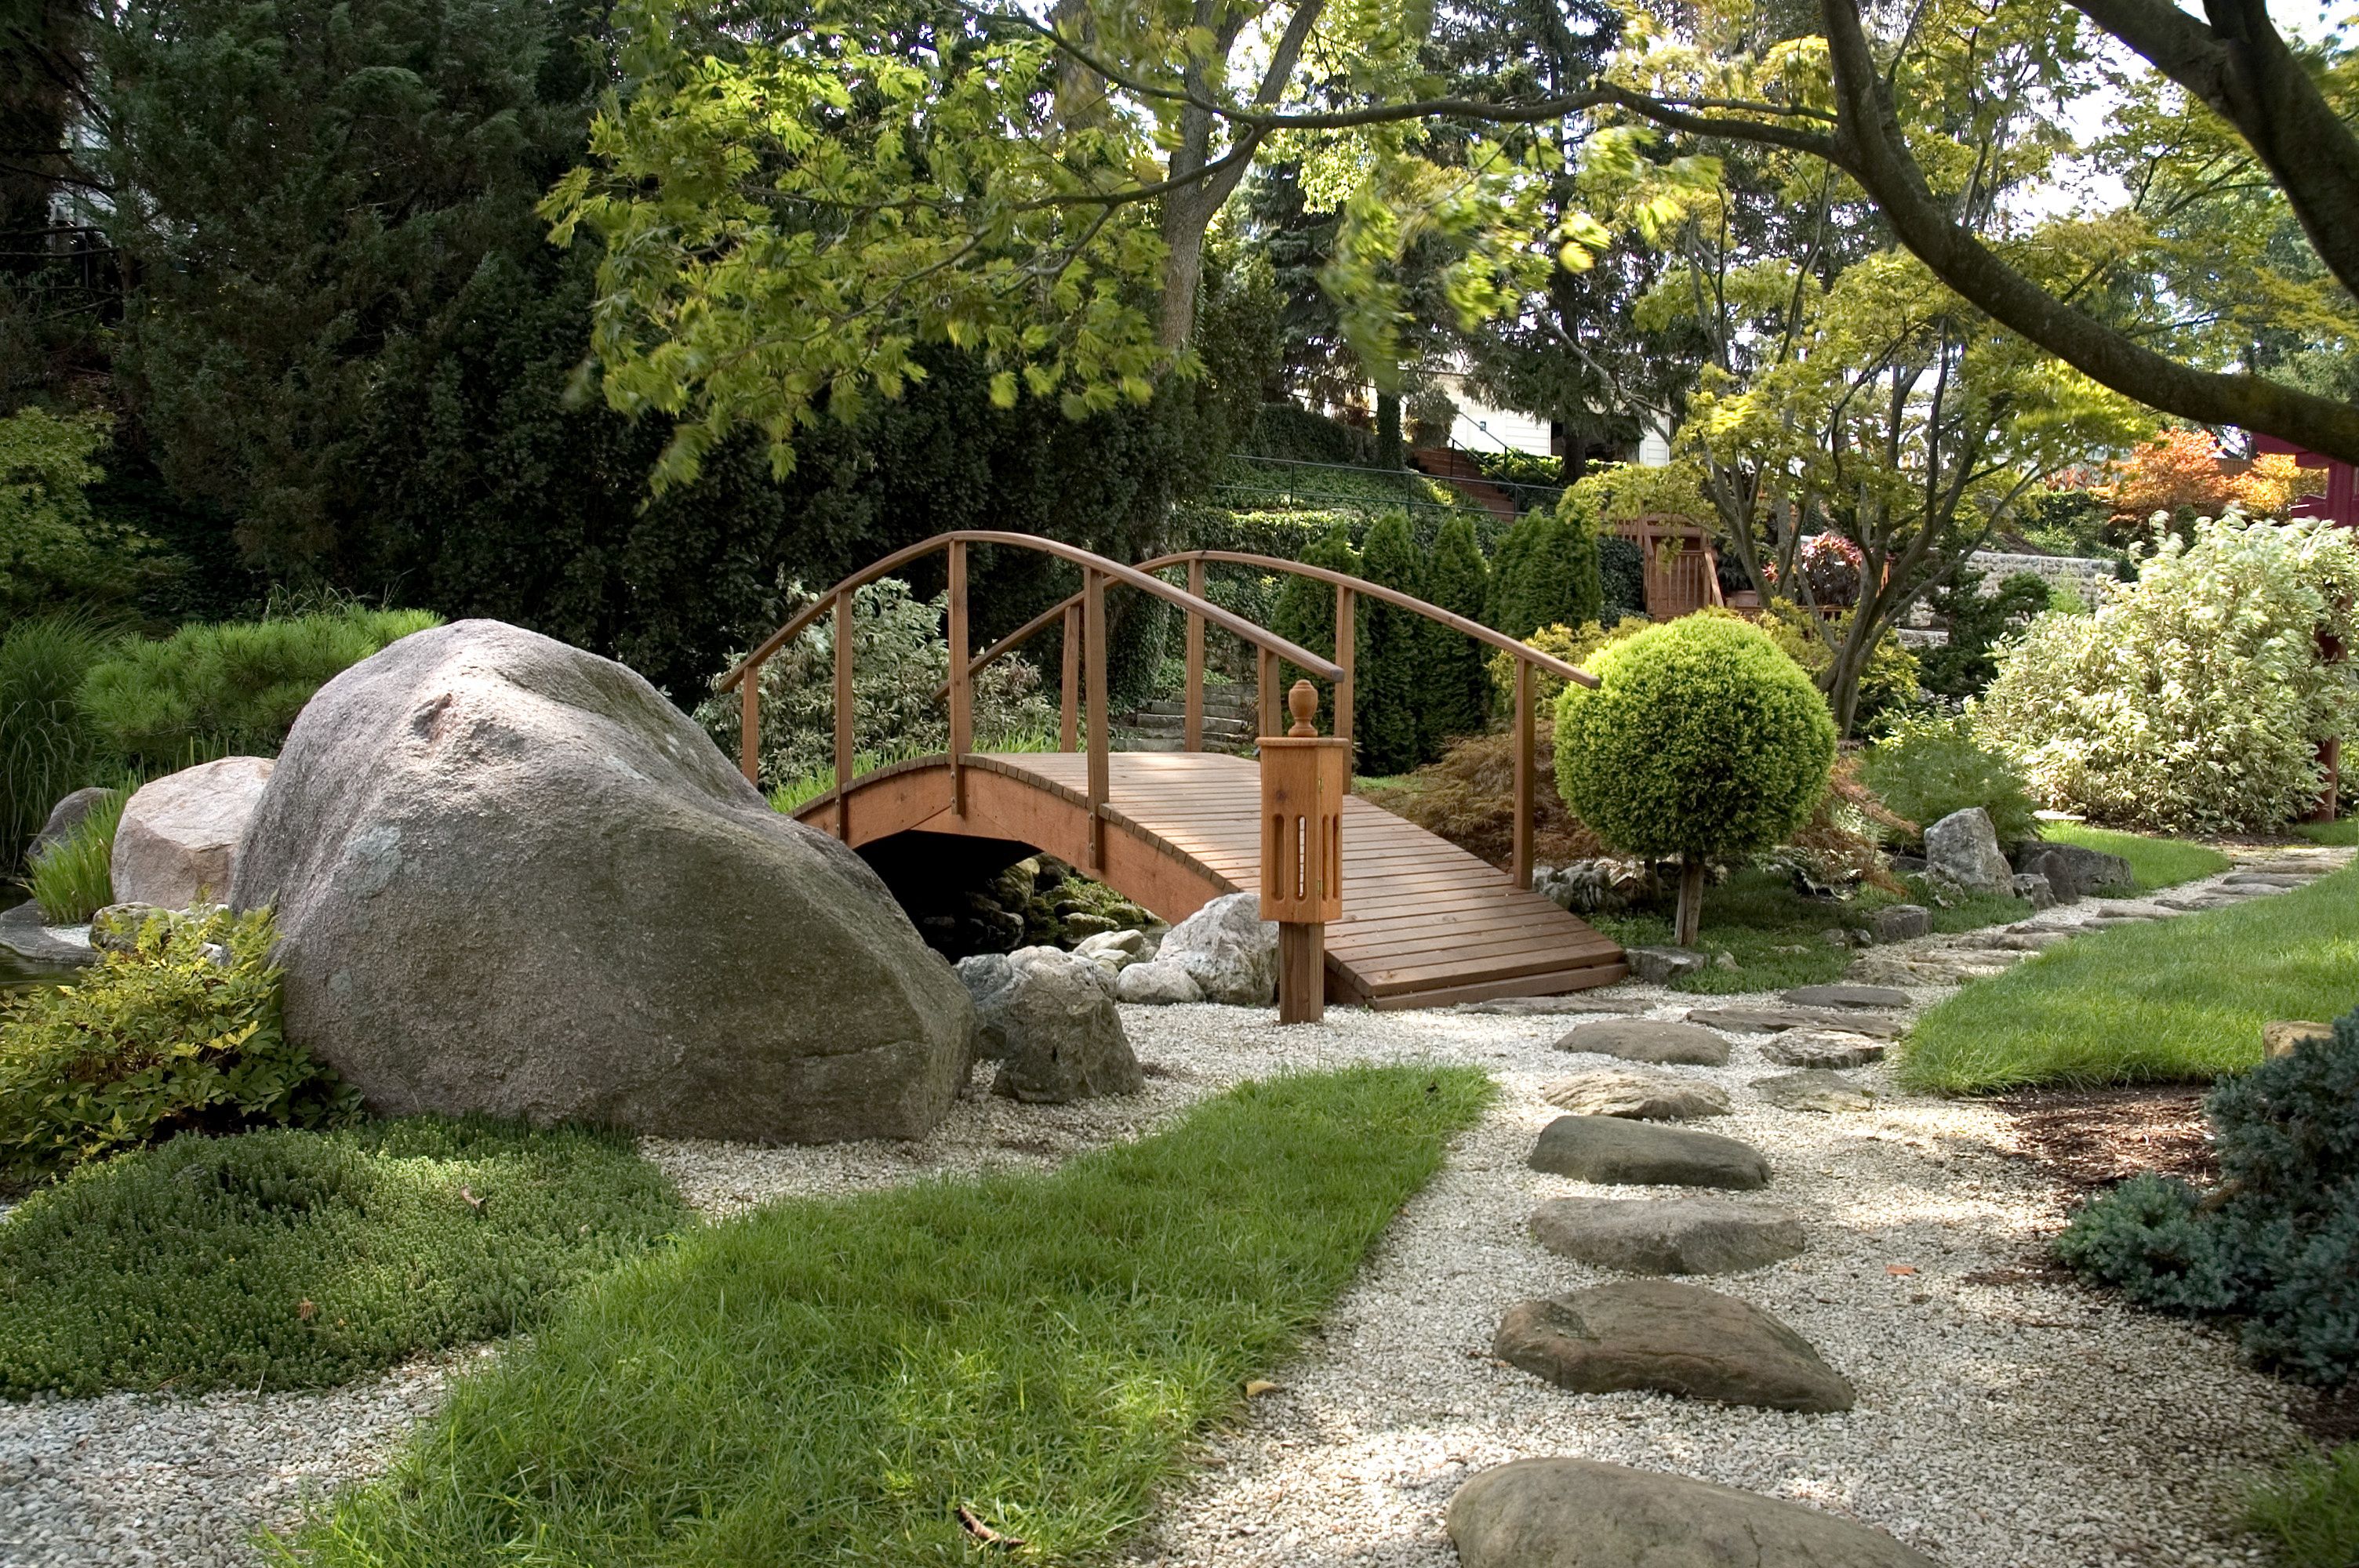 Japanese garden ideas on a budget, incorporate moss and existing larger rocks